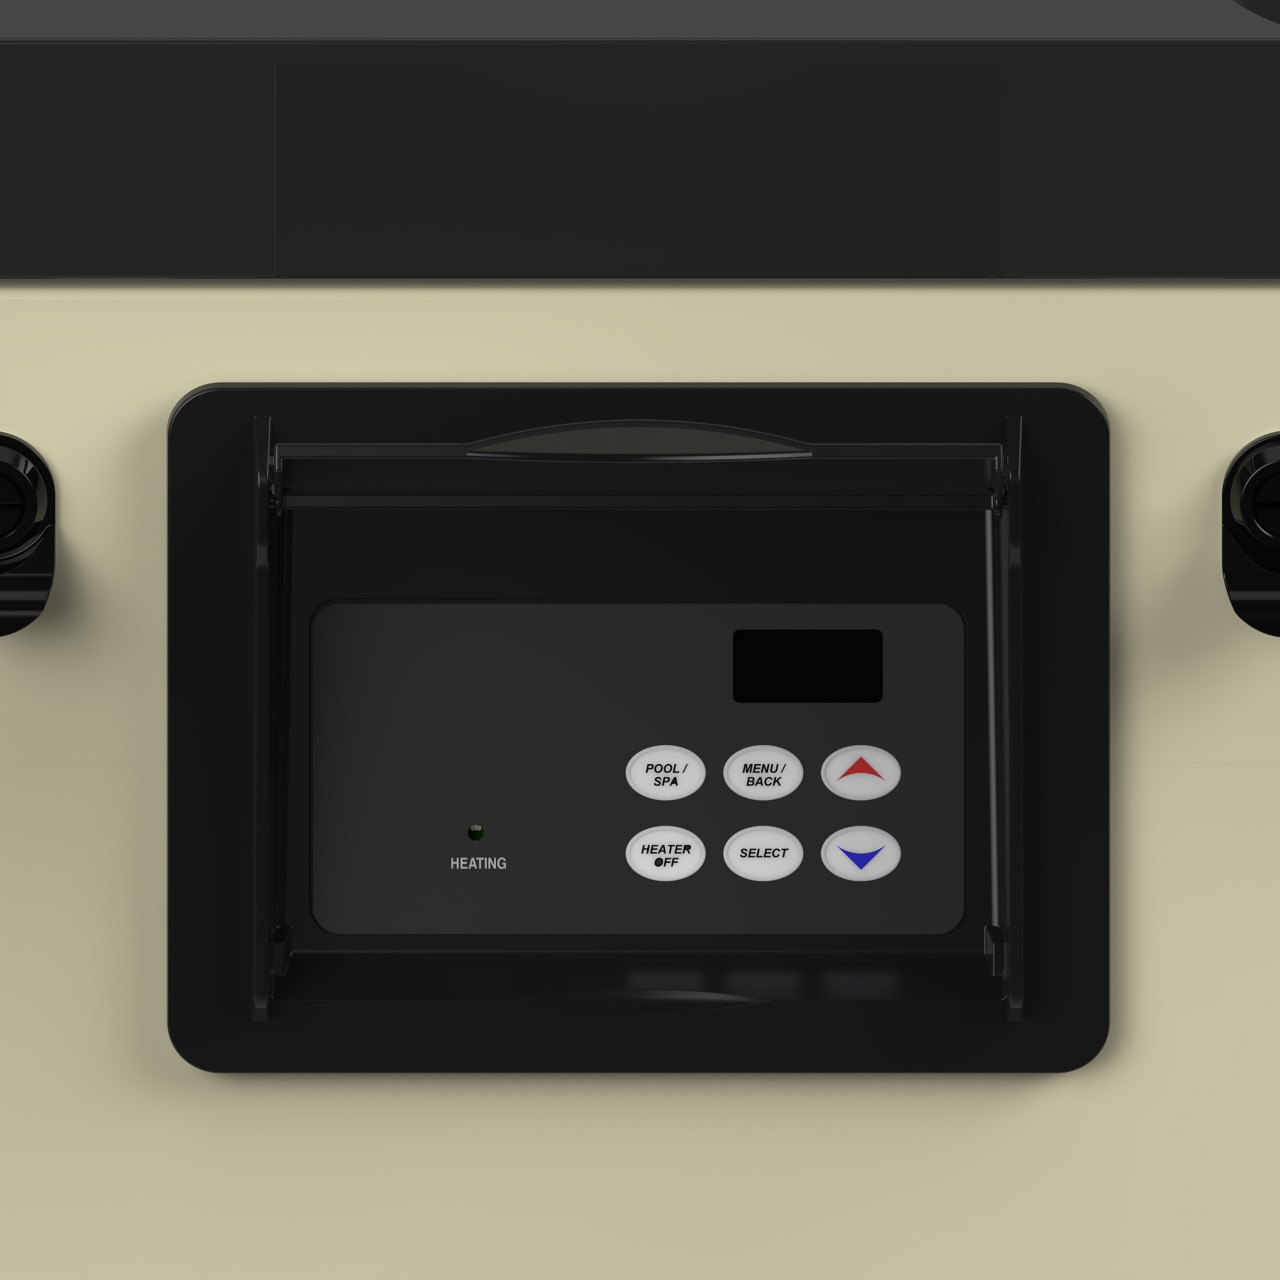 Control panel on heater with size buttons